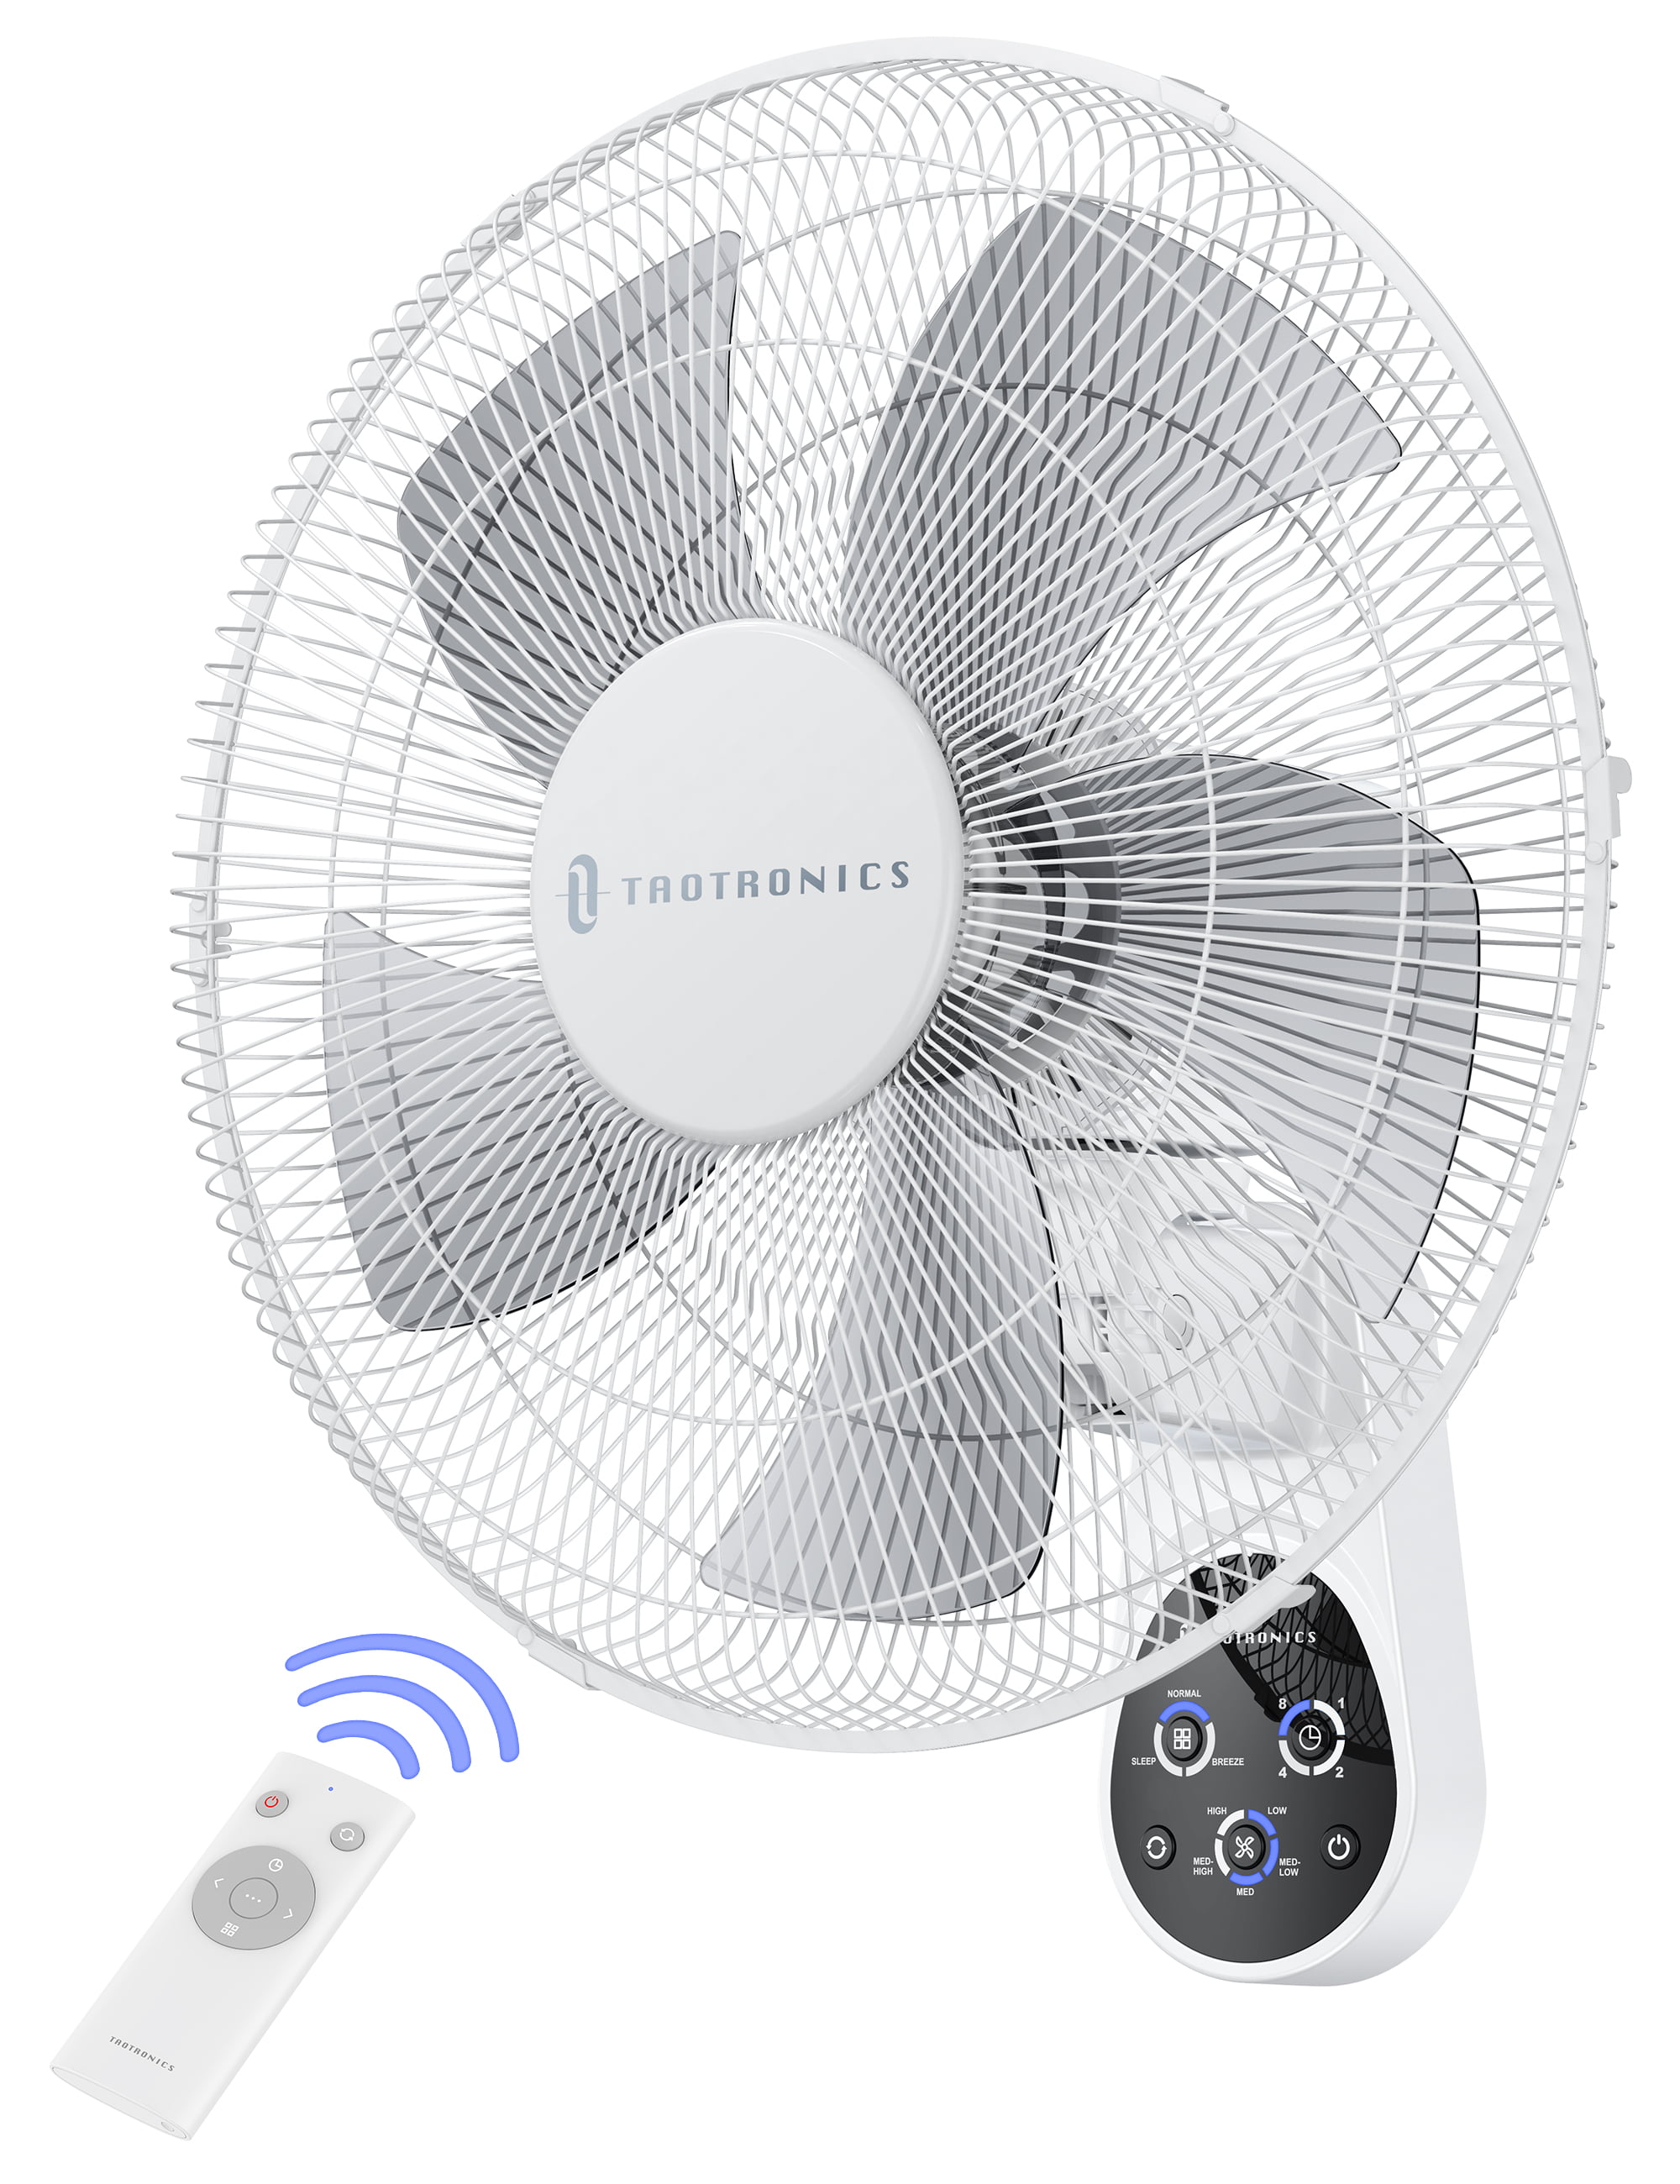 MNS MNS-05 Bladeless Wall Fan Remote Control Timer Wall-Mounted Air Cooler